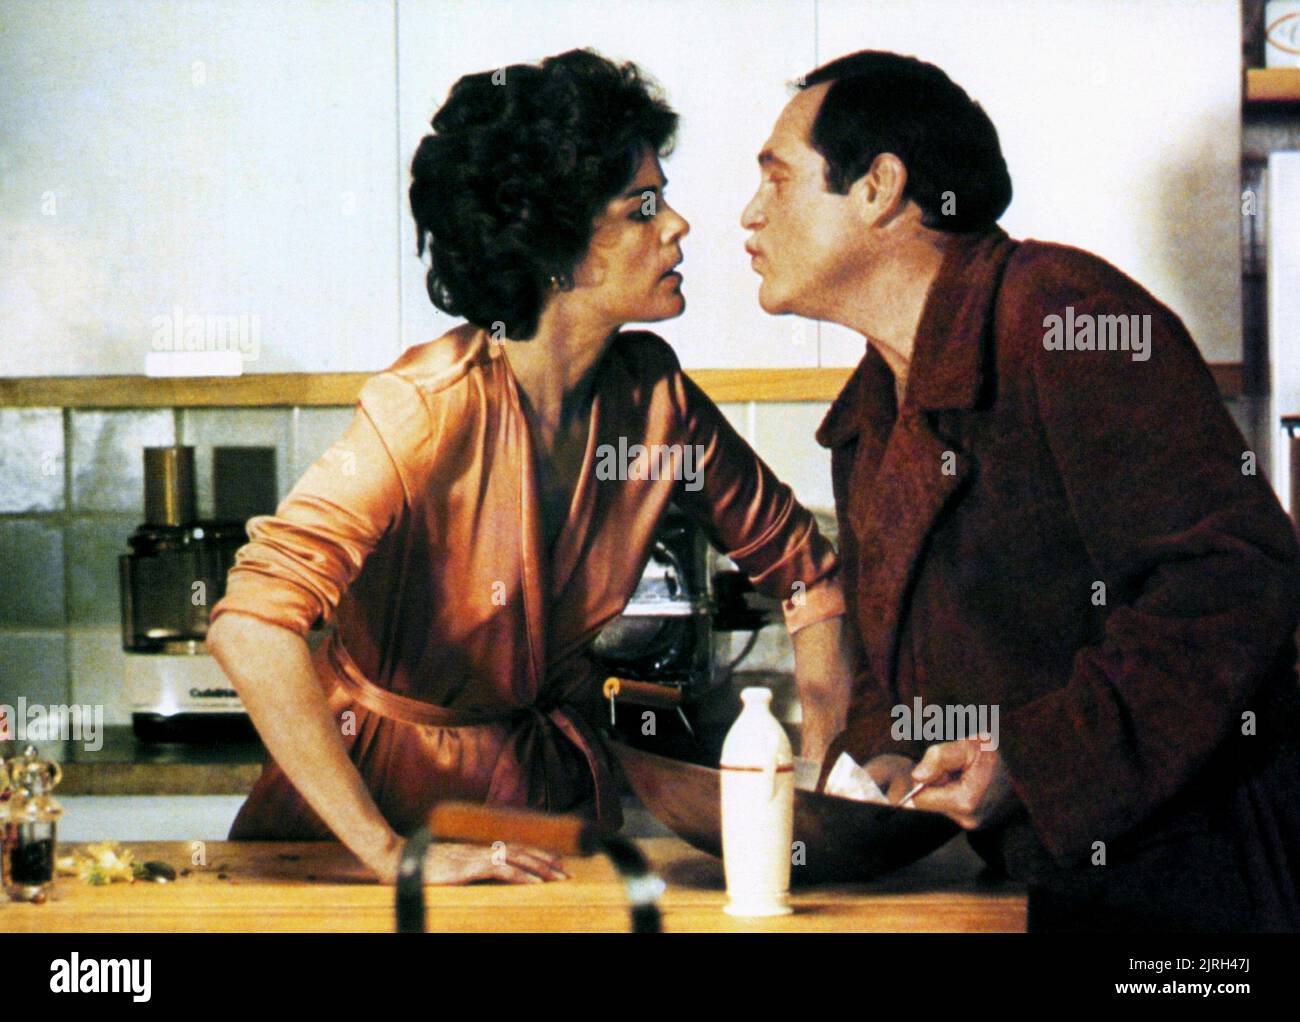 ALI MACGRAW, ALAN KING, JUST TELL ME WHAT YOU WANT, 1980 Stock Photo